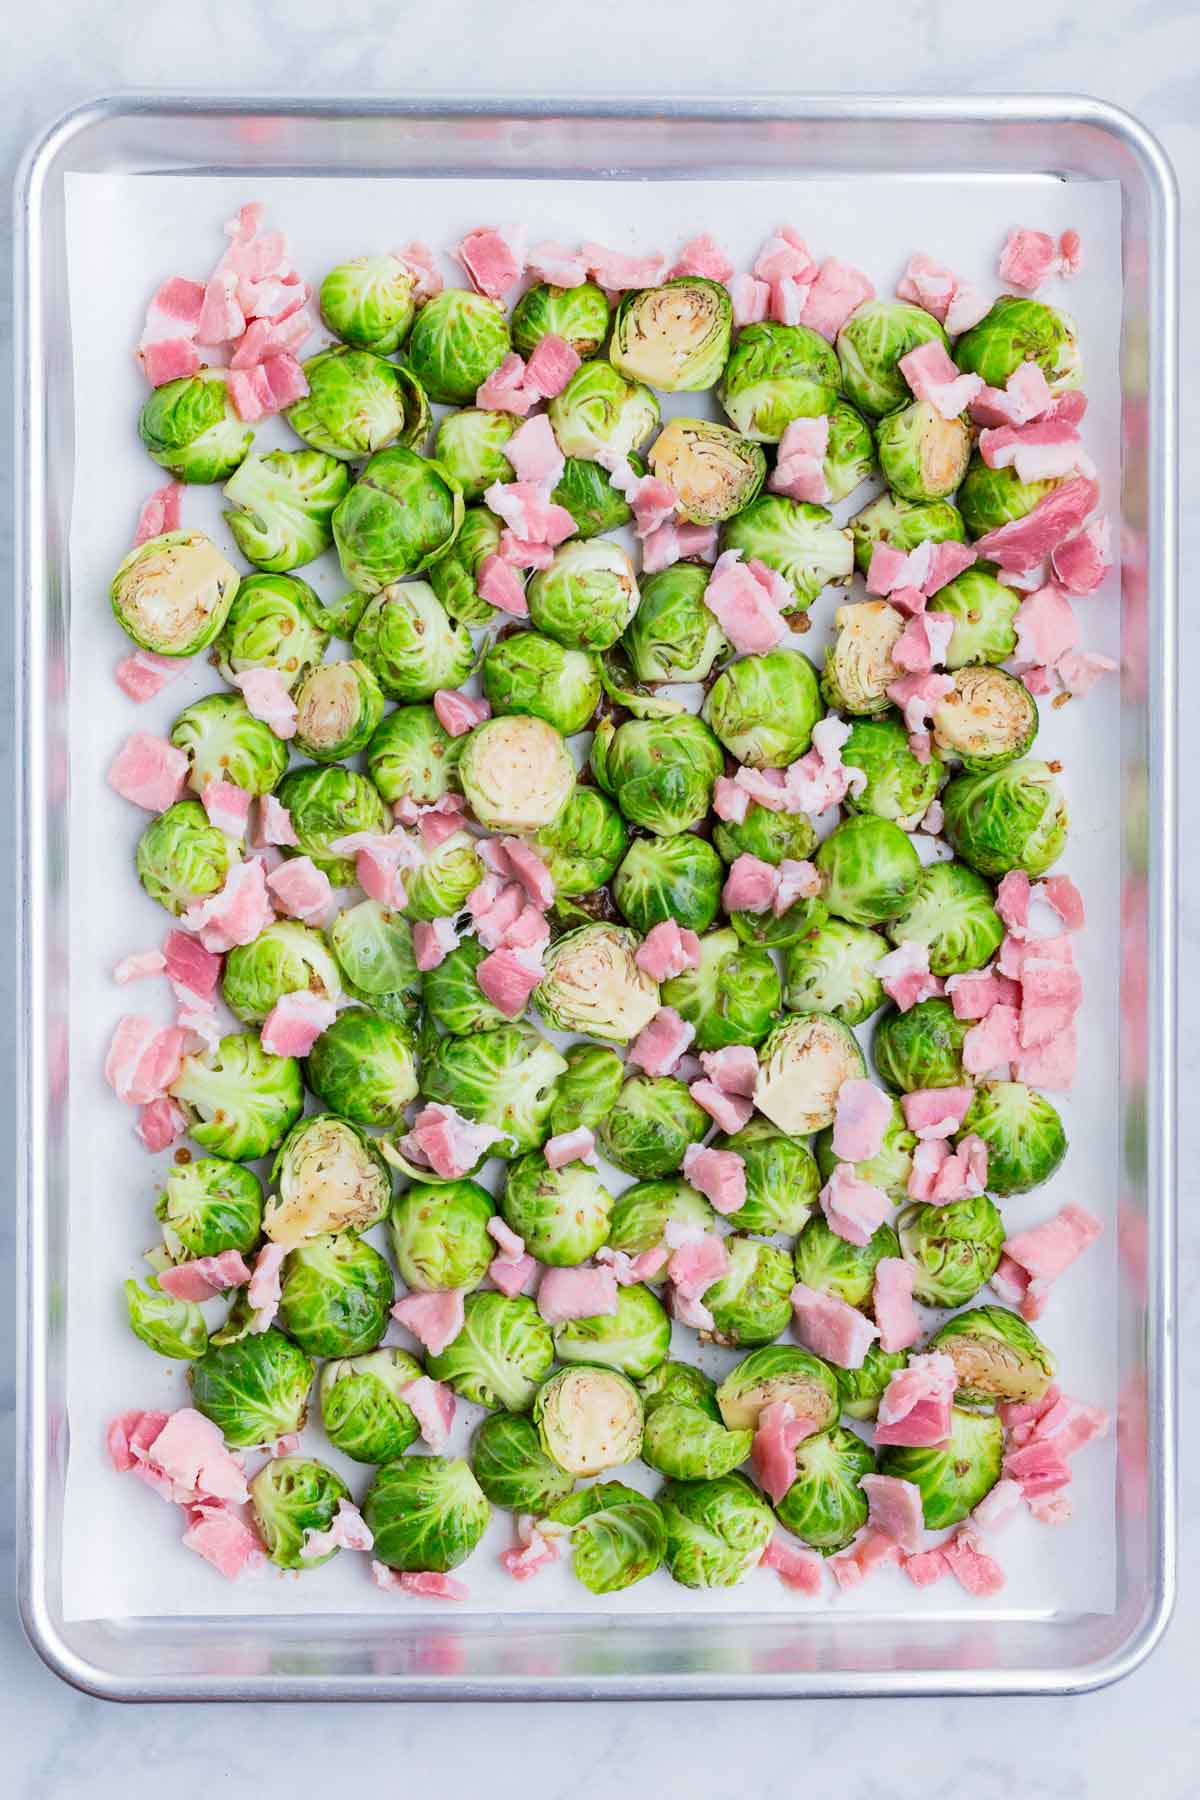 Coated Brussels sprouts and bacon are arranged on a baking sheet.